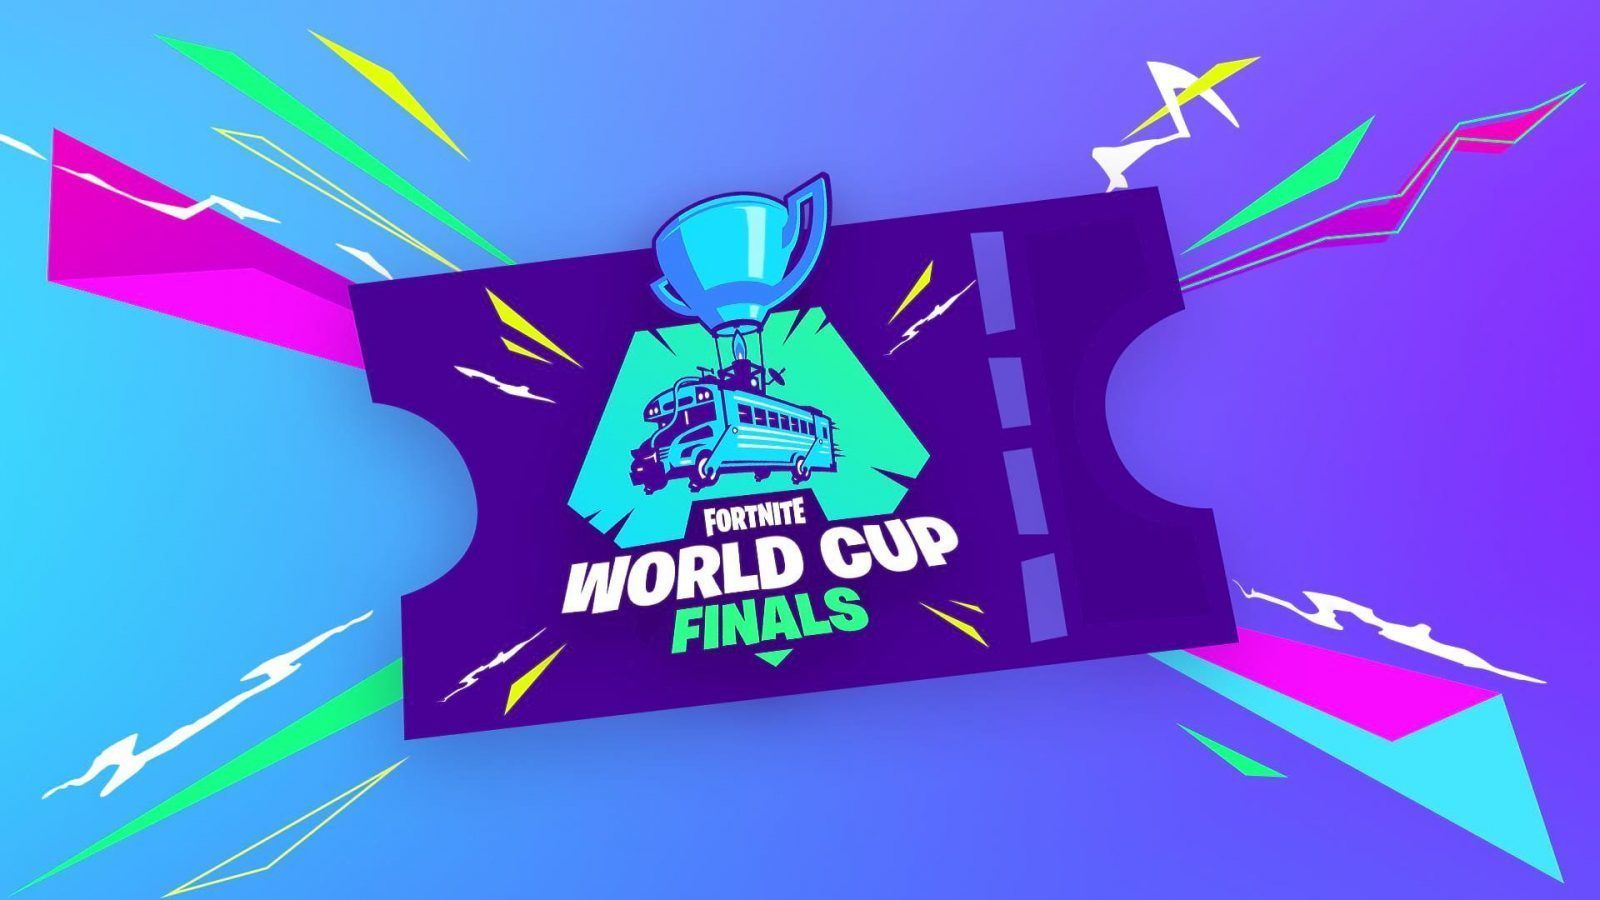 Fortnite World Cup 2019 Finals - What's happening and how to watch